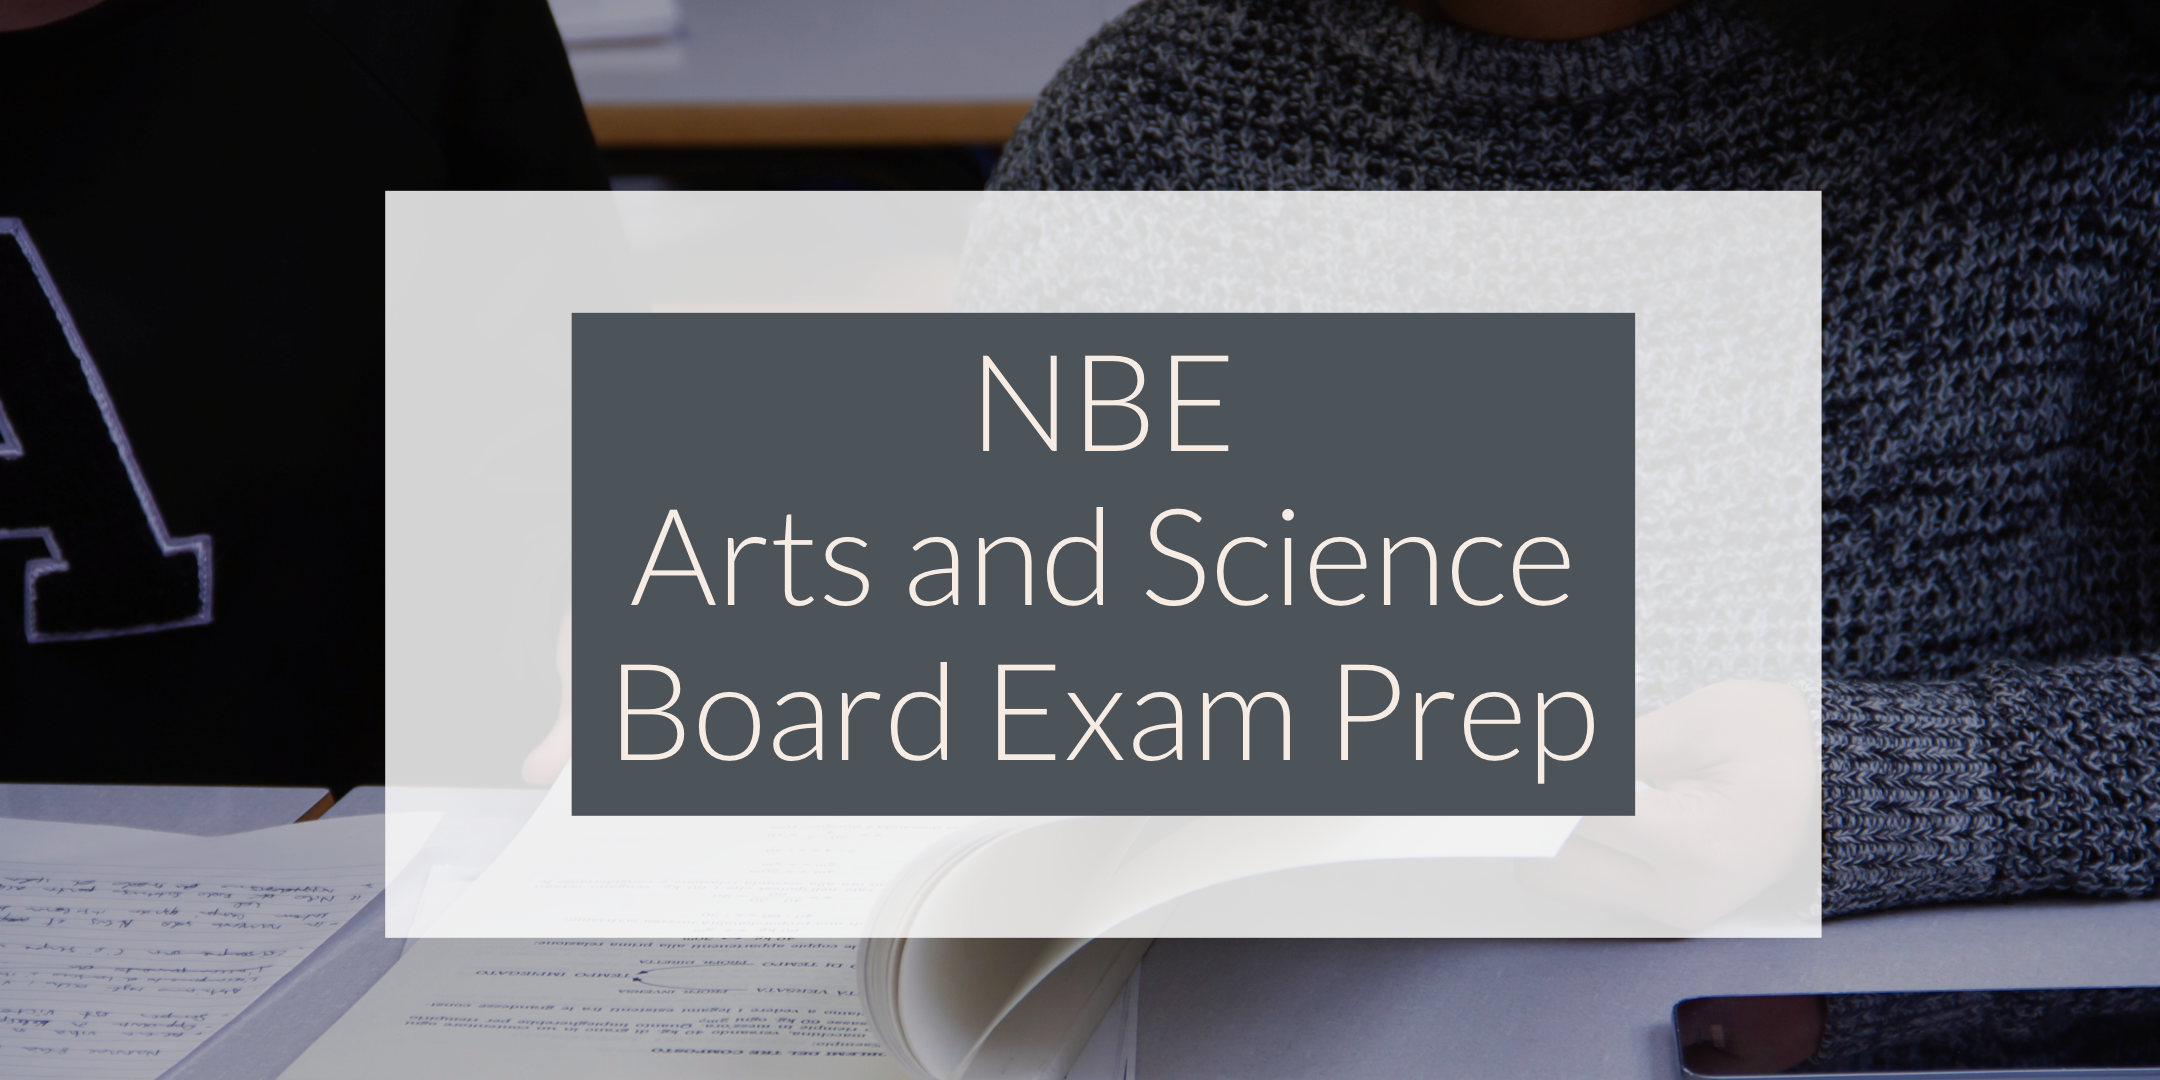 NBE Arts and Science Board Exam Prep